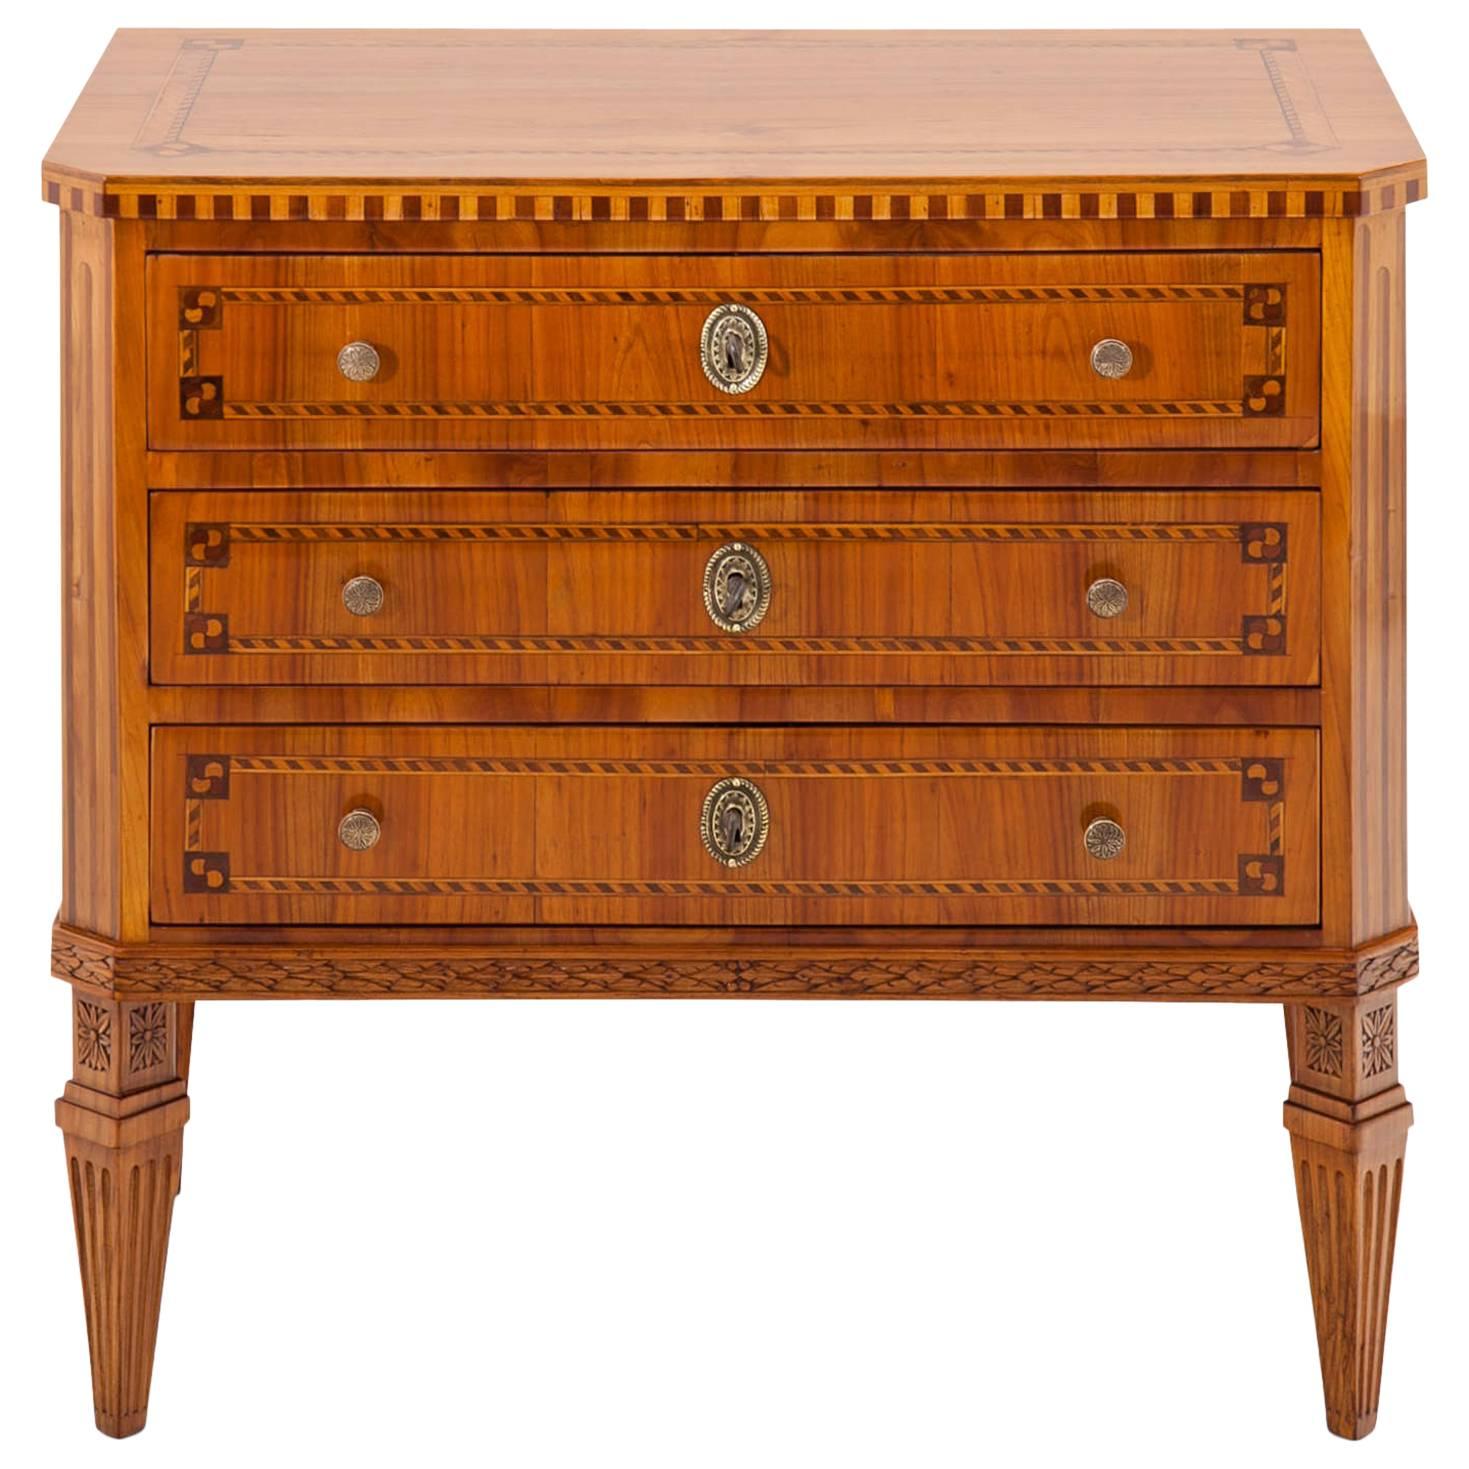 Louis Seize-Style Chest of Drawers, 19th Century